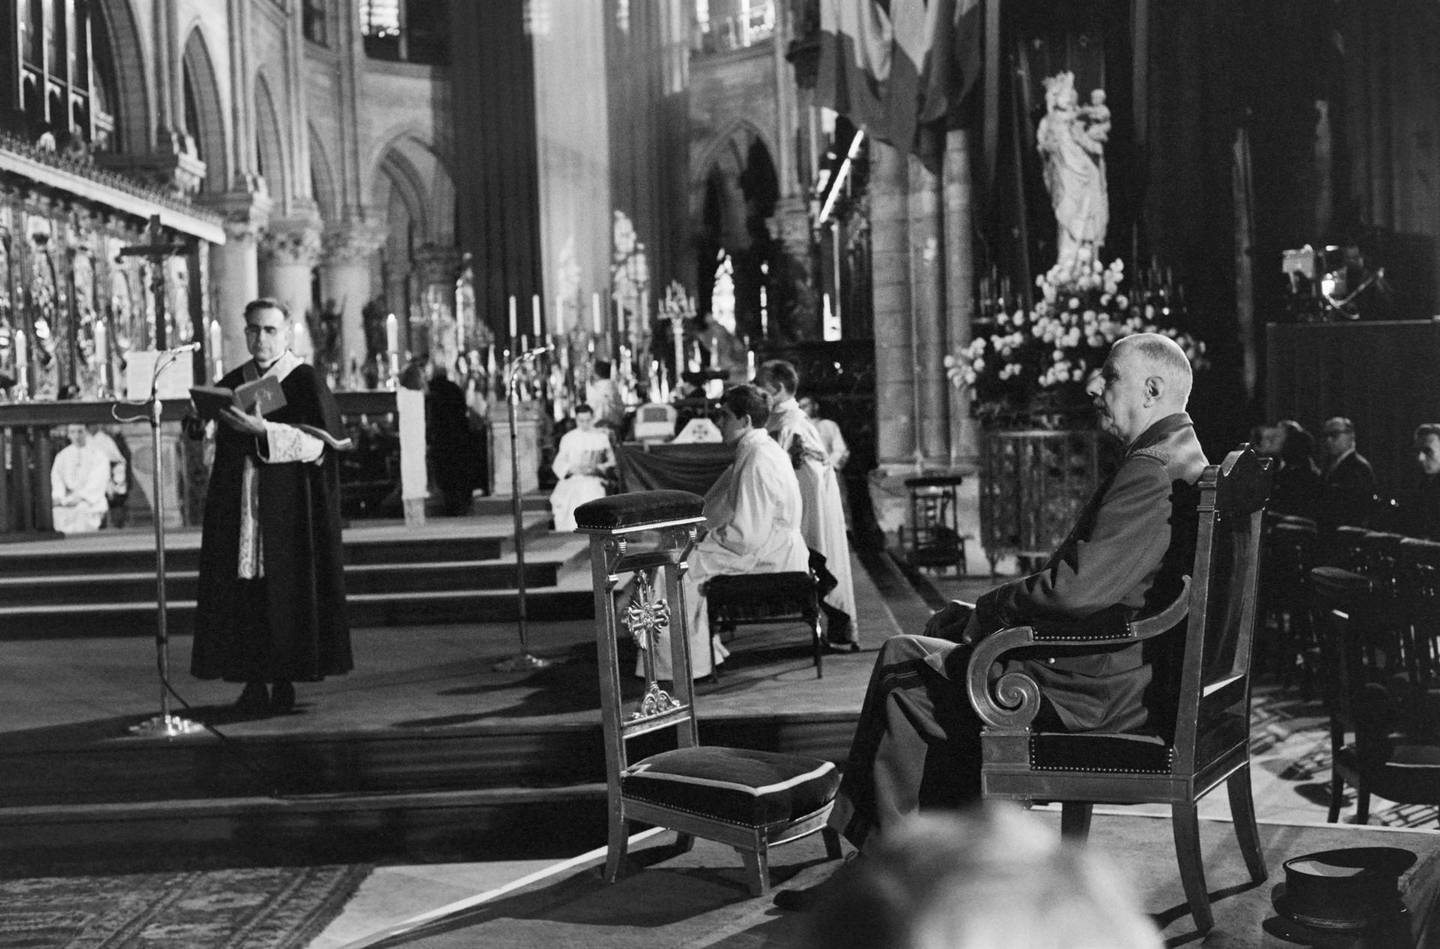 (FILES) In this file photo taken on April 25, 1965 French President Charles de Gaulle attends a mass at the Notre Dame de Paris Cathedral in Paris in memory of deportees who died in concentration camps.   A huge fire swept through the roof of the famed Notre-Dame Cathedral in central Paris on April 15, 2019, sending flames and huge clouds of grey smoke billowing into the sky. The flames and smoke plumed from the spire and roof of the gothic cathedral, visited by millions of people a year.  / AFP / -
